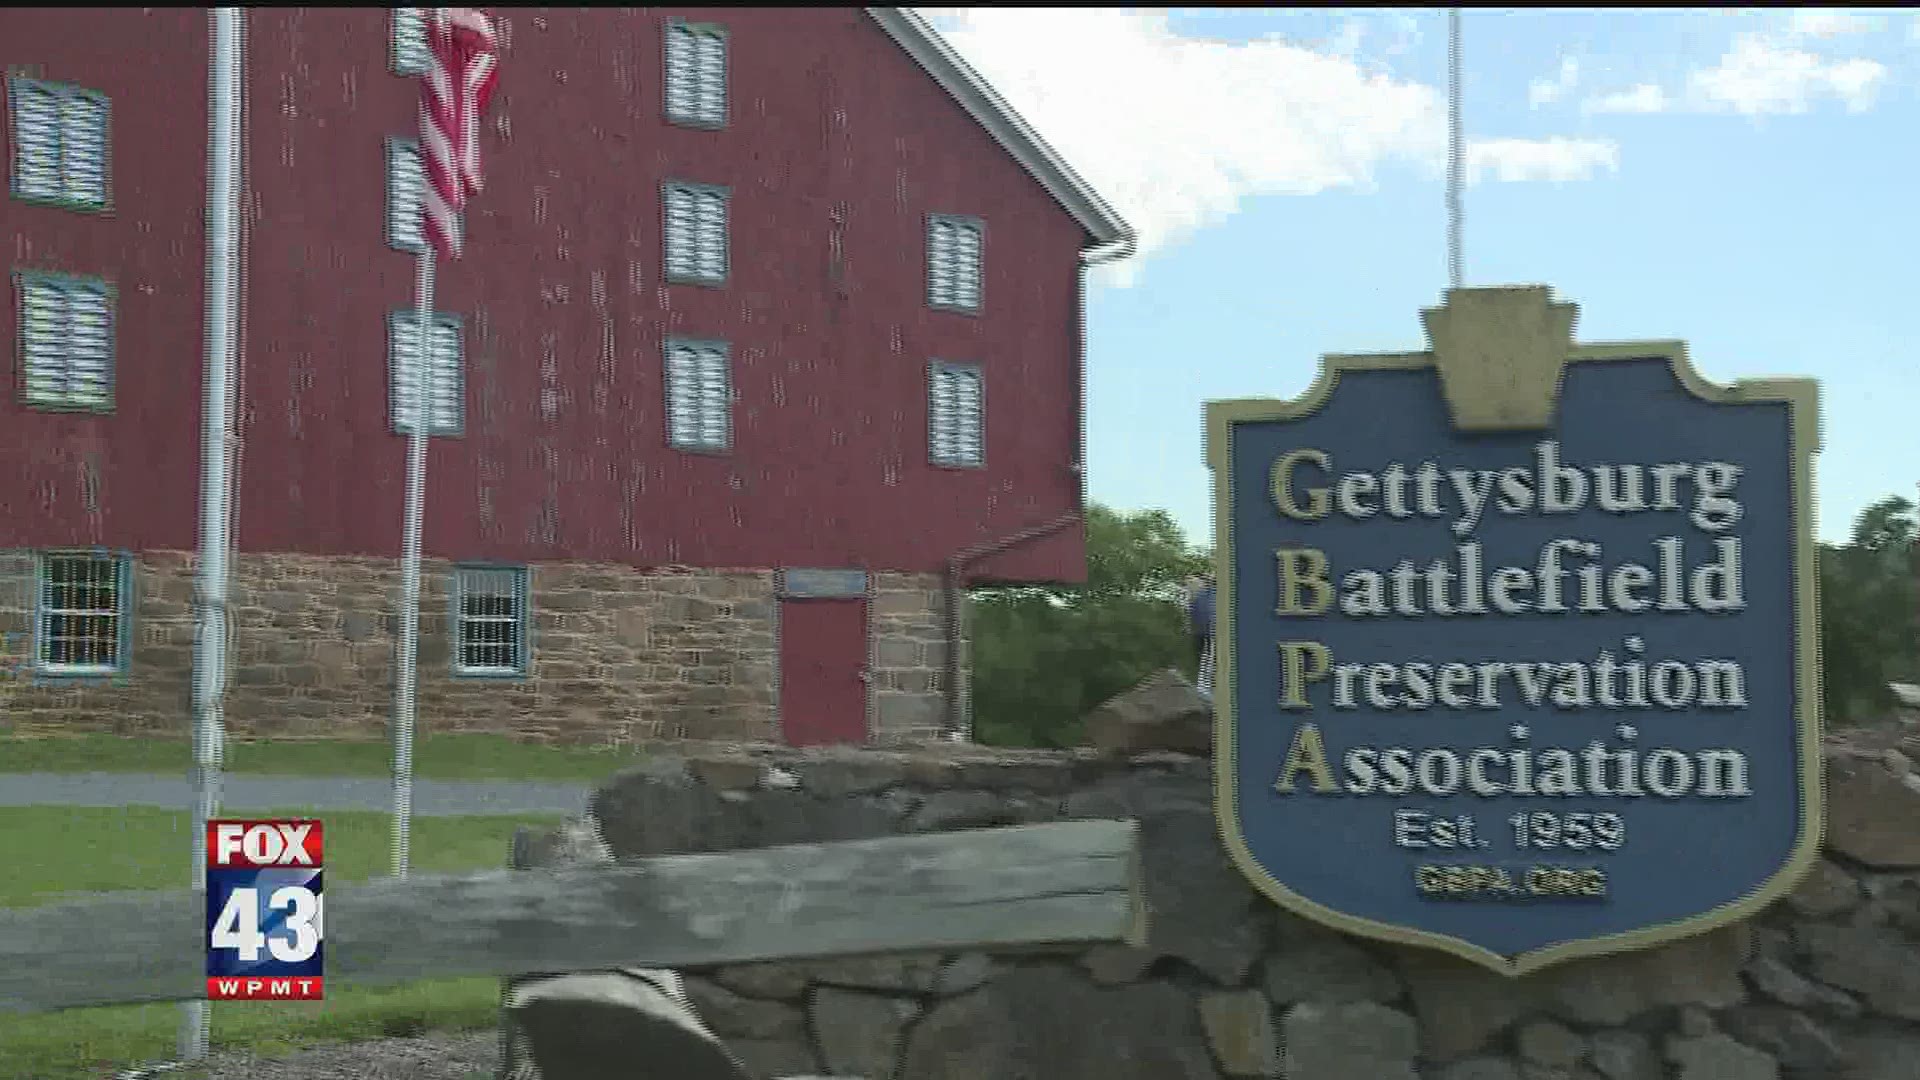 The Gettysburg Battlefield Preservation Association will host the event August 22 & 23 at the Historic Daniel Lady Farm